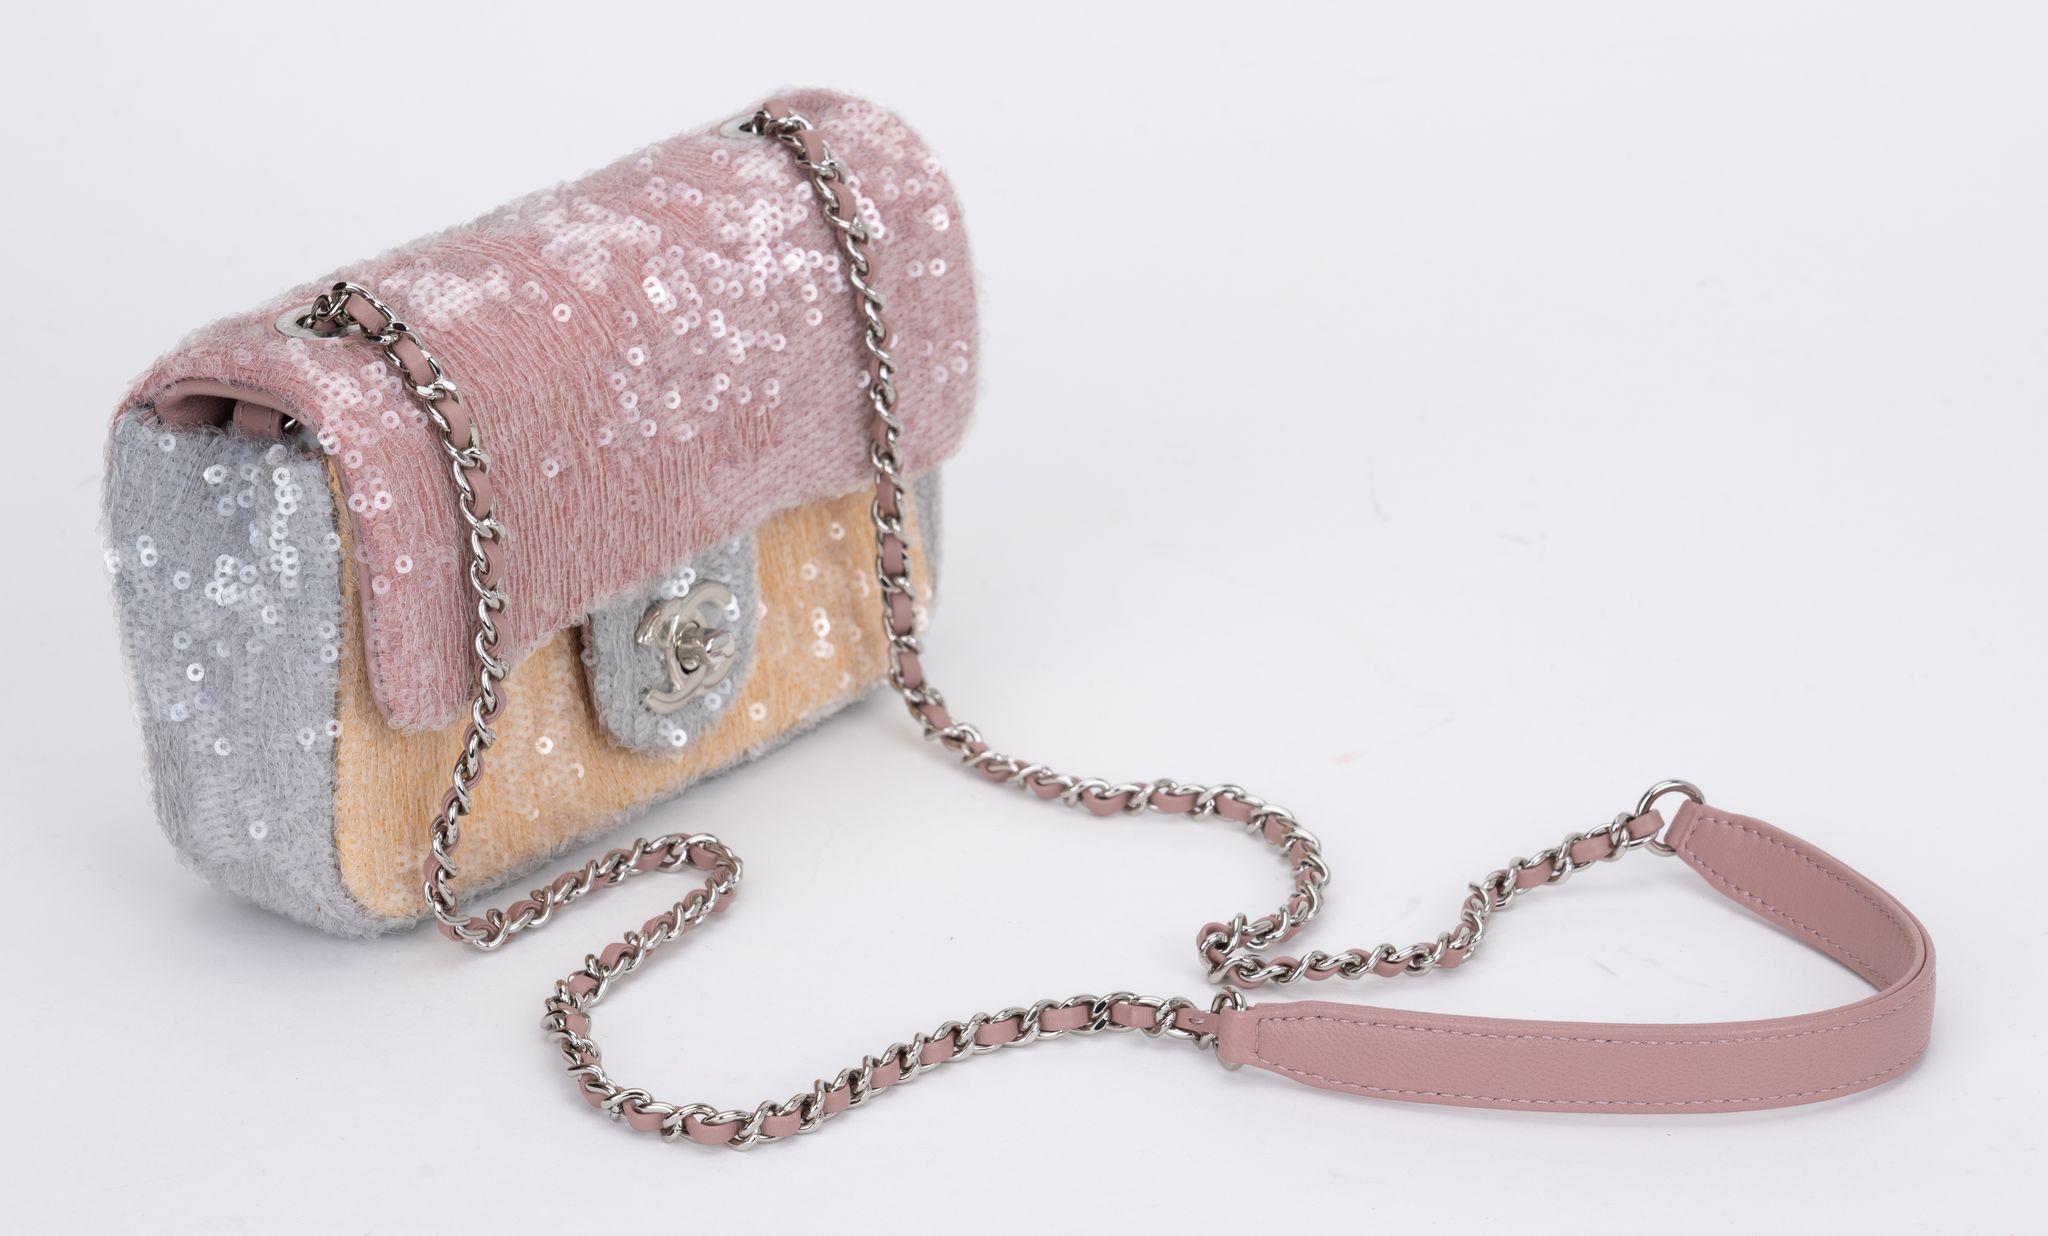 Chanlel new mini rectangular sequins cross body flap bag.New condition with plastic on hardware. Celeste, pink and yellow color combo with silver hardware. Lined in pink leather. Shoulder drop 22